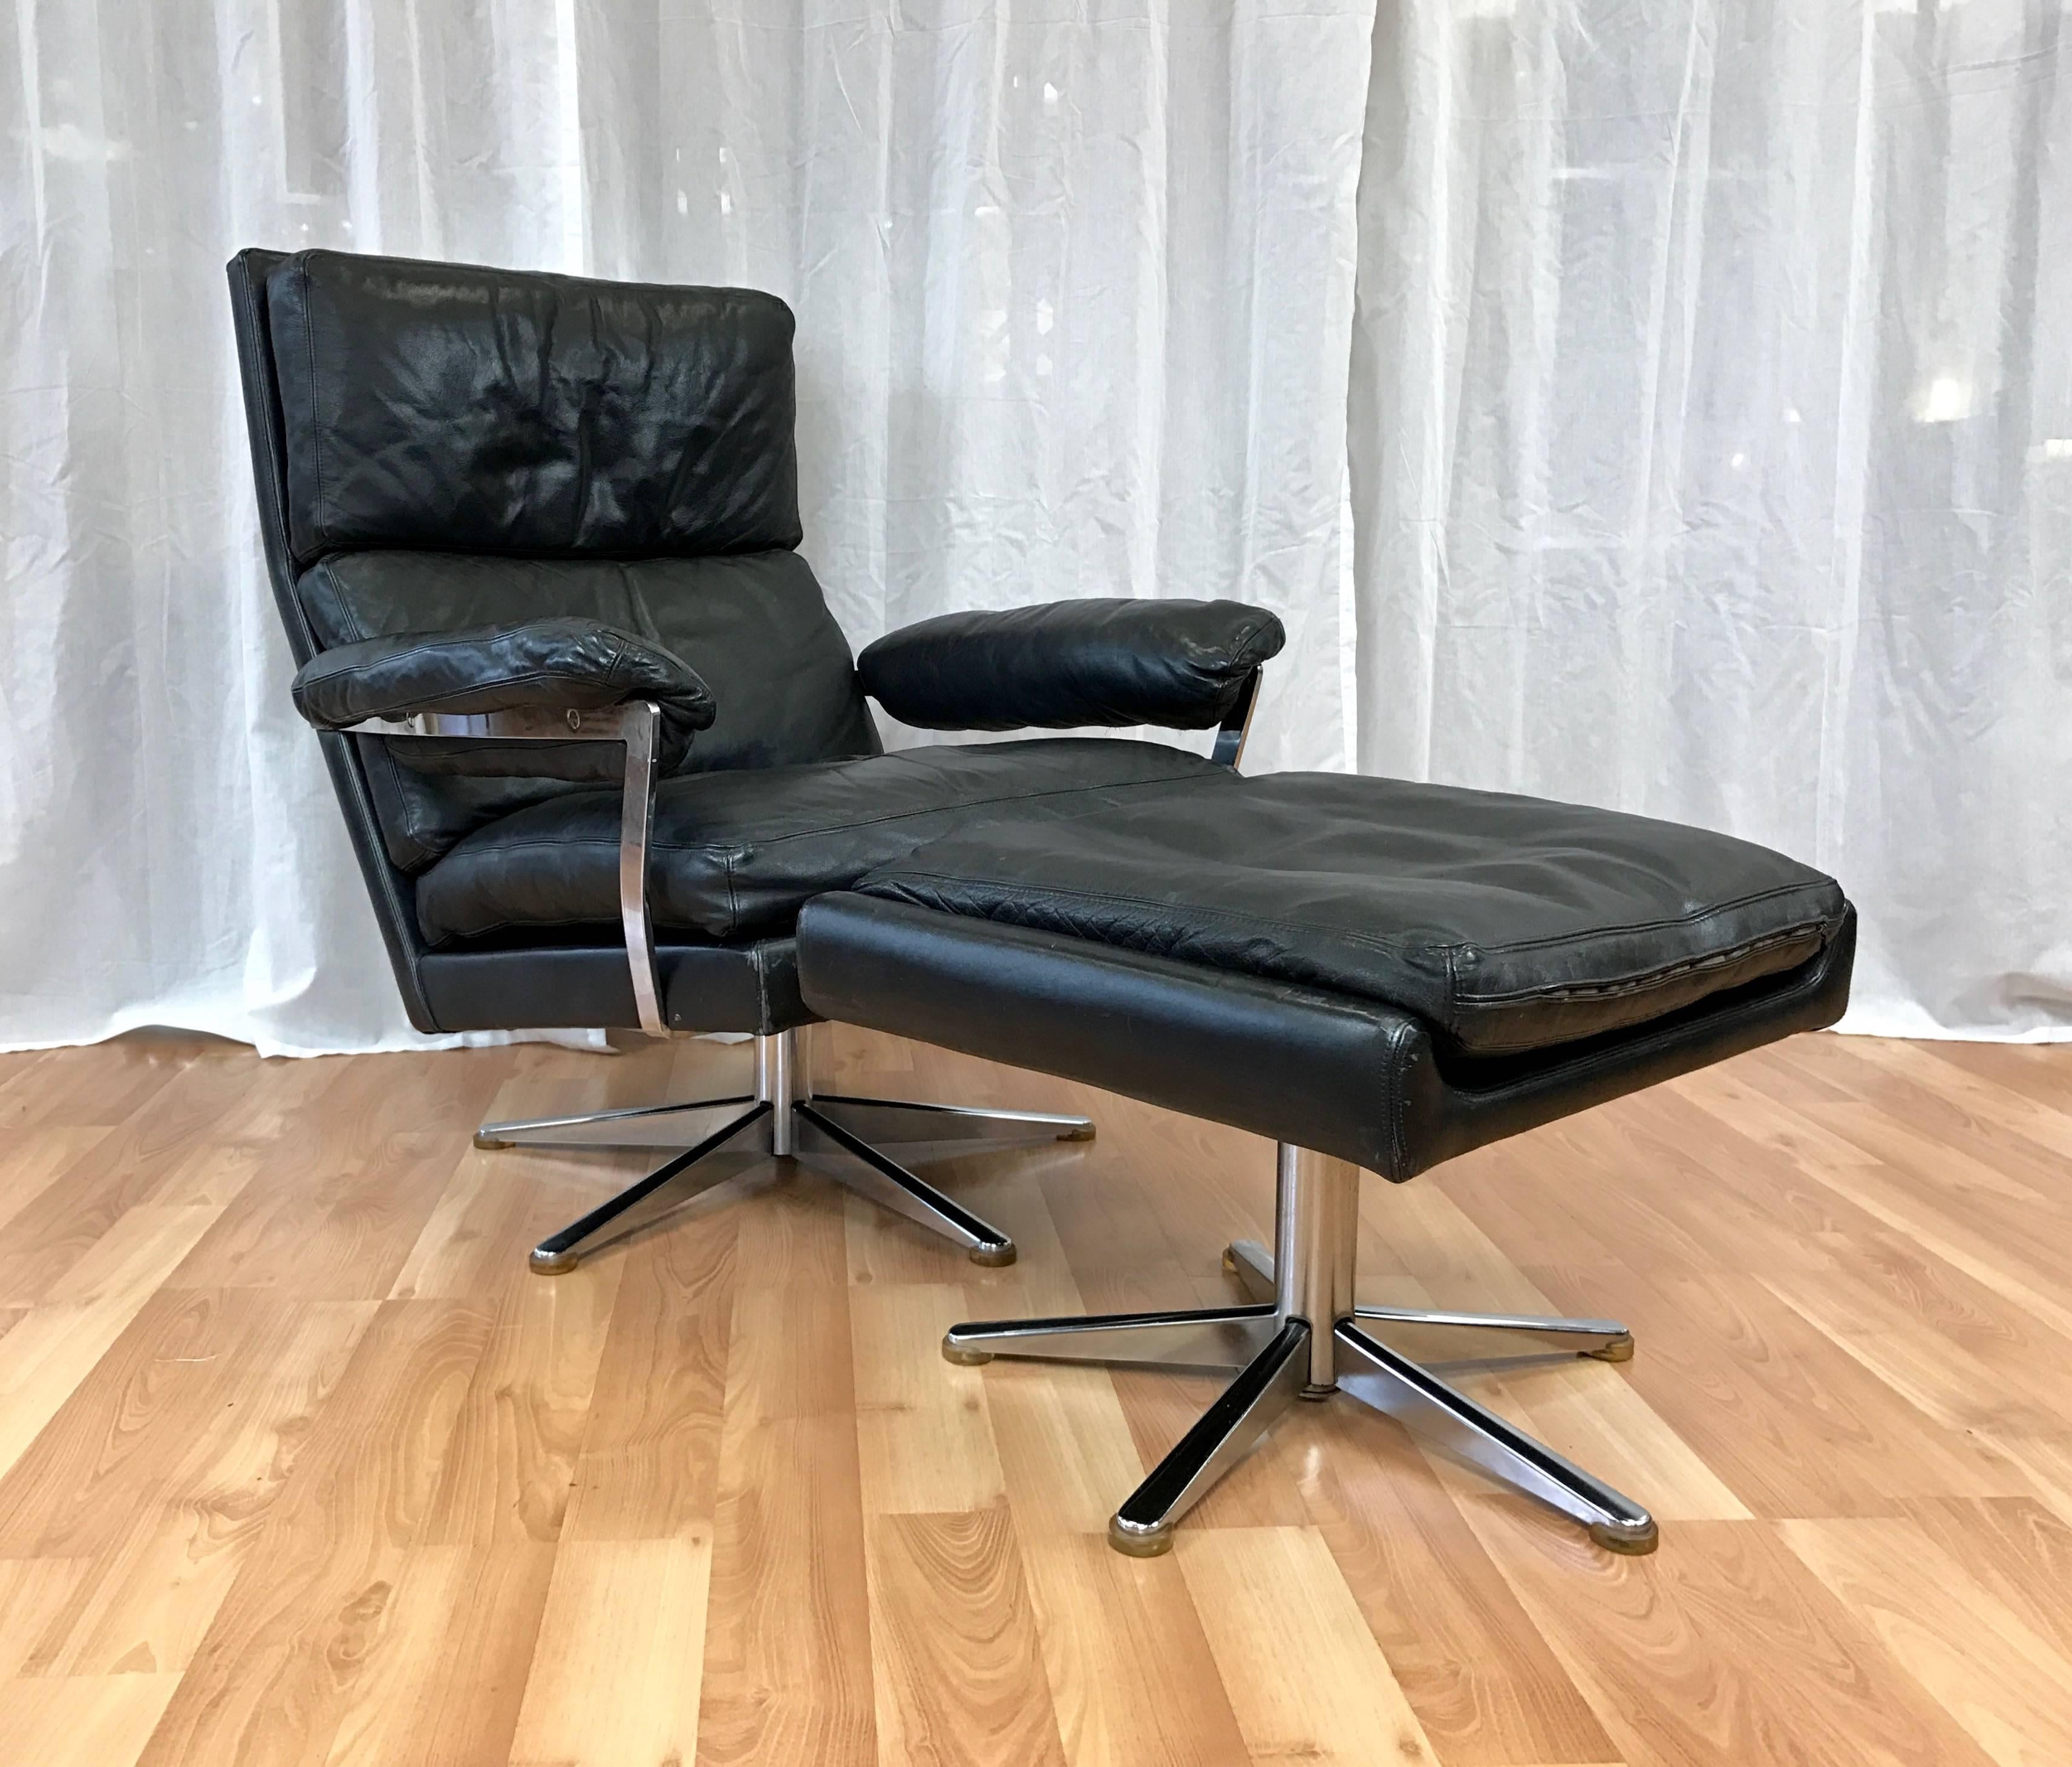 A vintage black leather swiveling lounge chair and ottoman from Sweden.

Clean lines, canted back and generous size make for a very handsome and comfortable chair. Fully upholstered in semi-aniline leather with down and foam padding. Polished flat